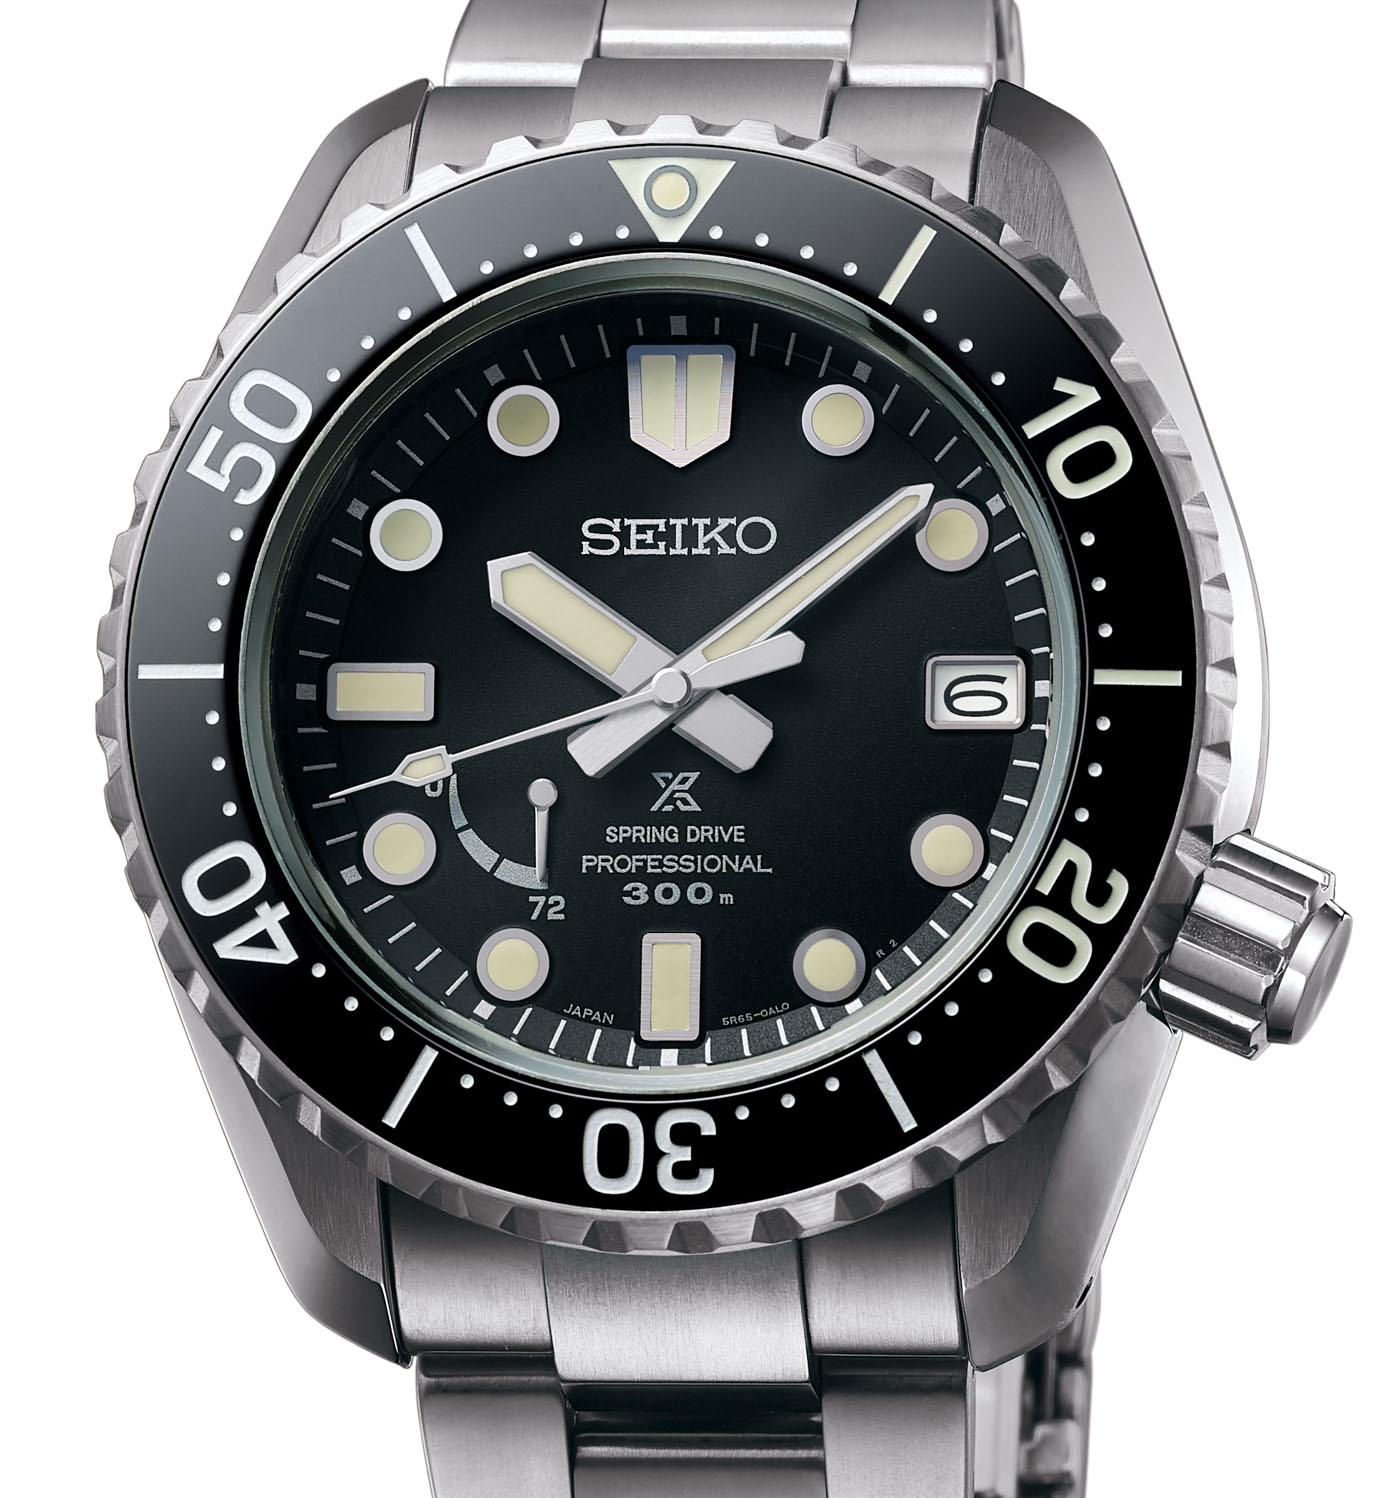 Seiko Prospex LX Collection With Spring Drive Movements For BaselWorld 2019  | aBlogtoWatch